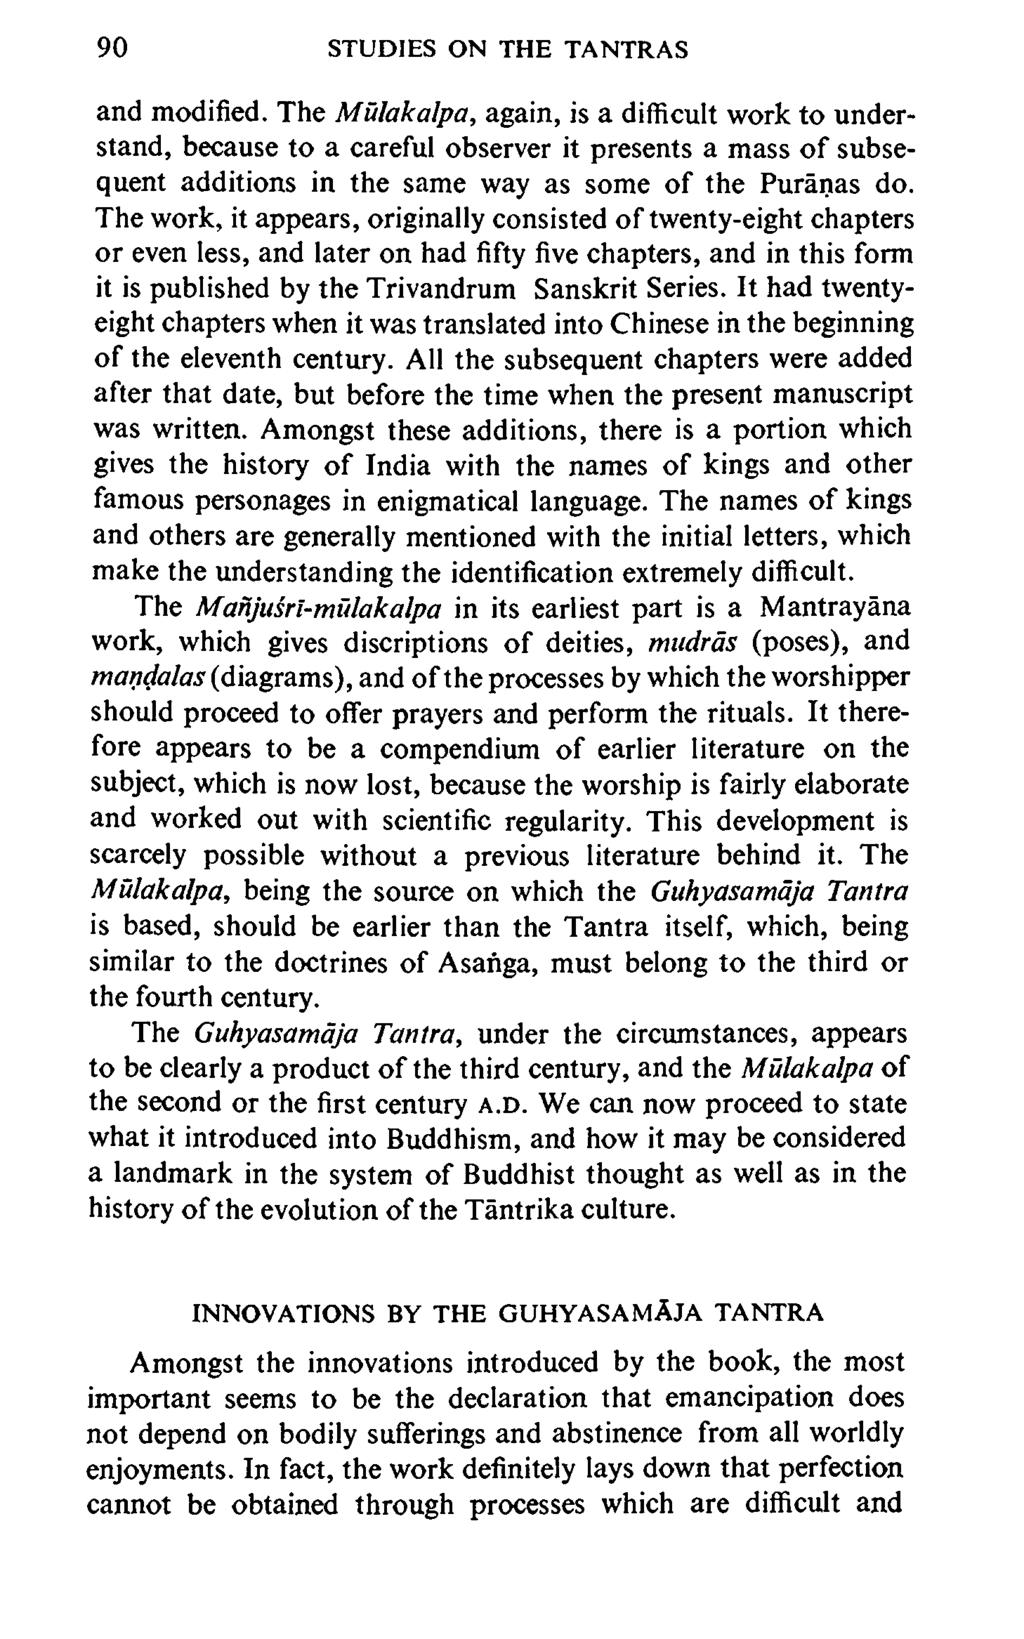 90 STUDIES ON THE TANTRAS and modified.